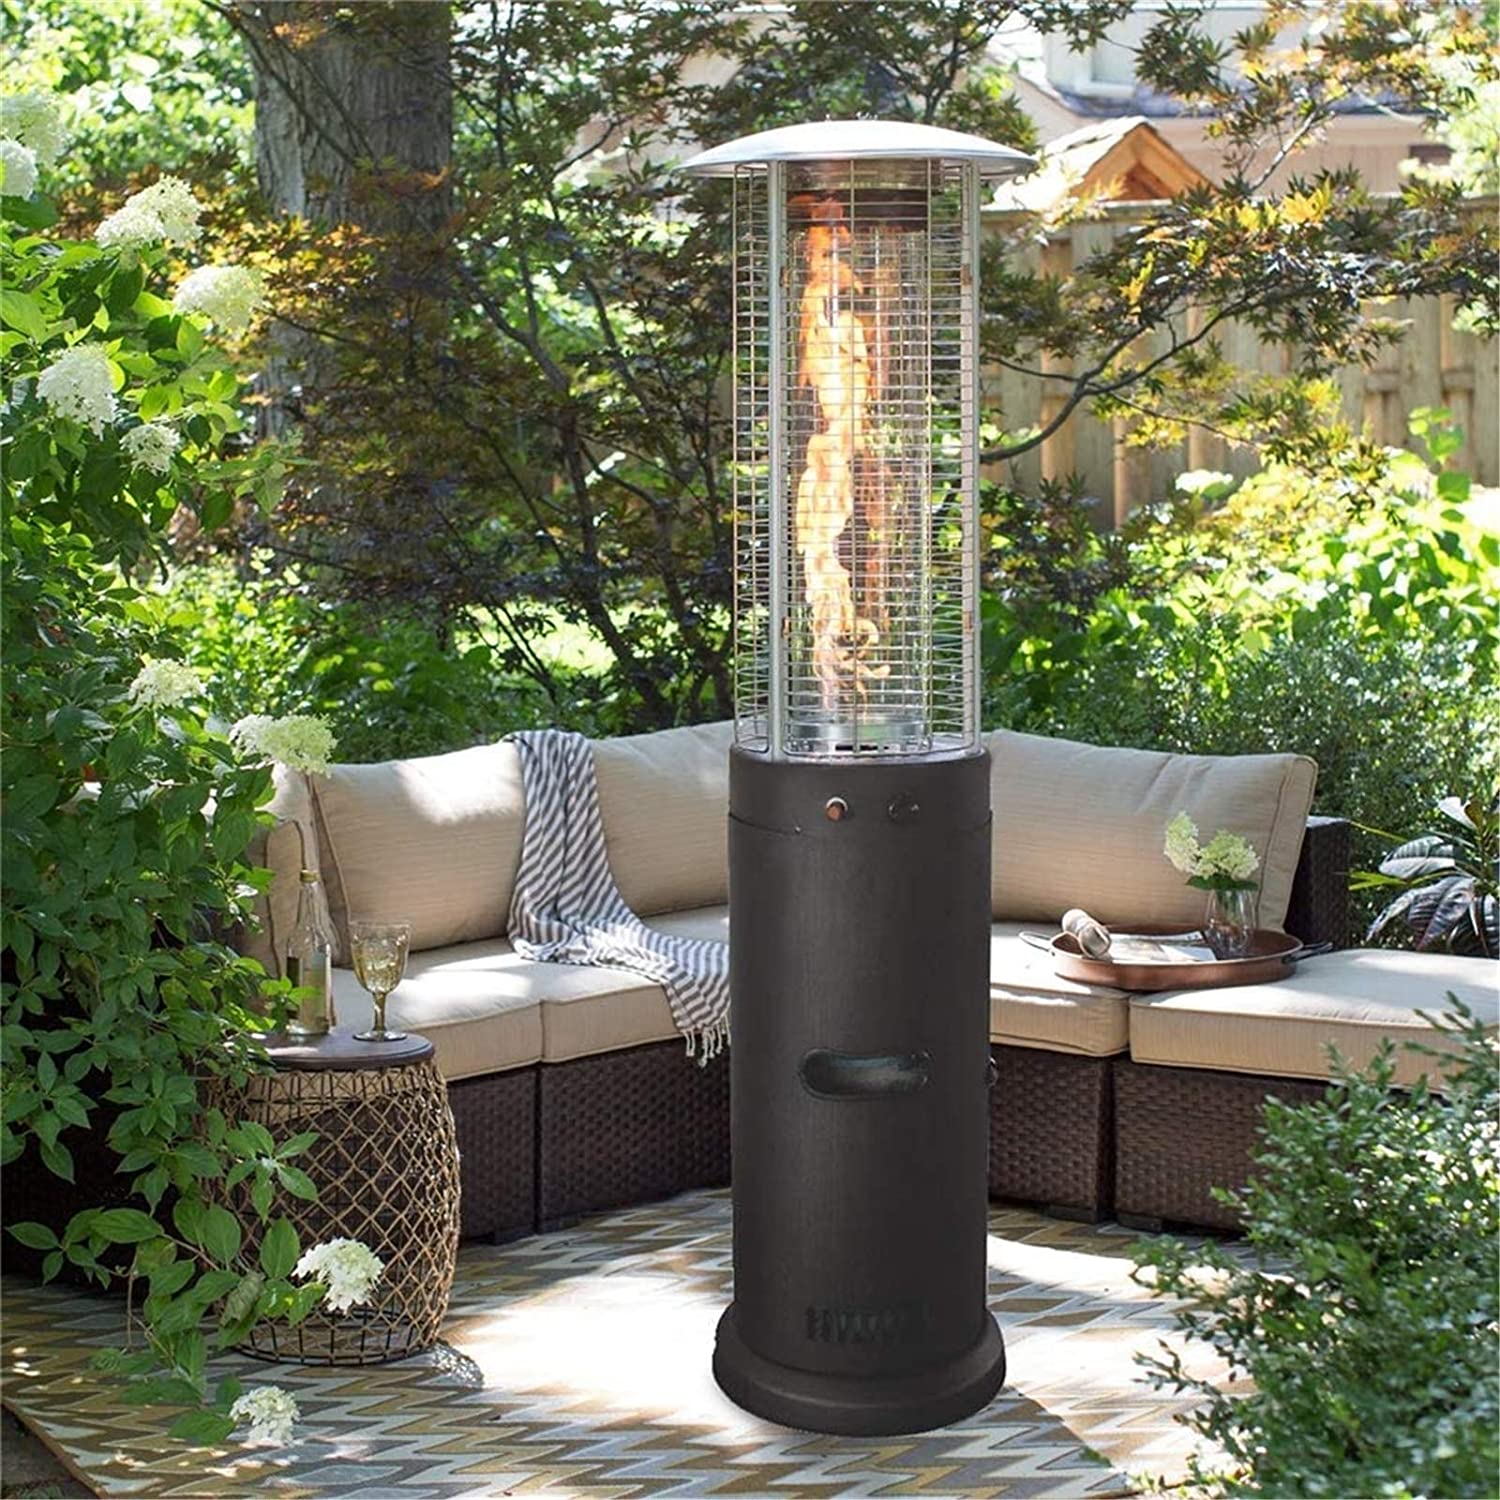 The Best Pyramid Patio Heater In 2021 Reviews By Heating Pros